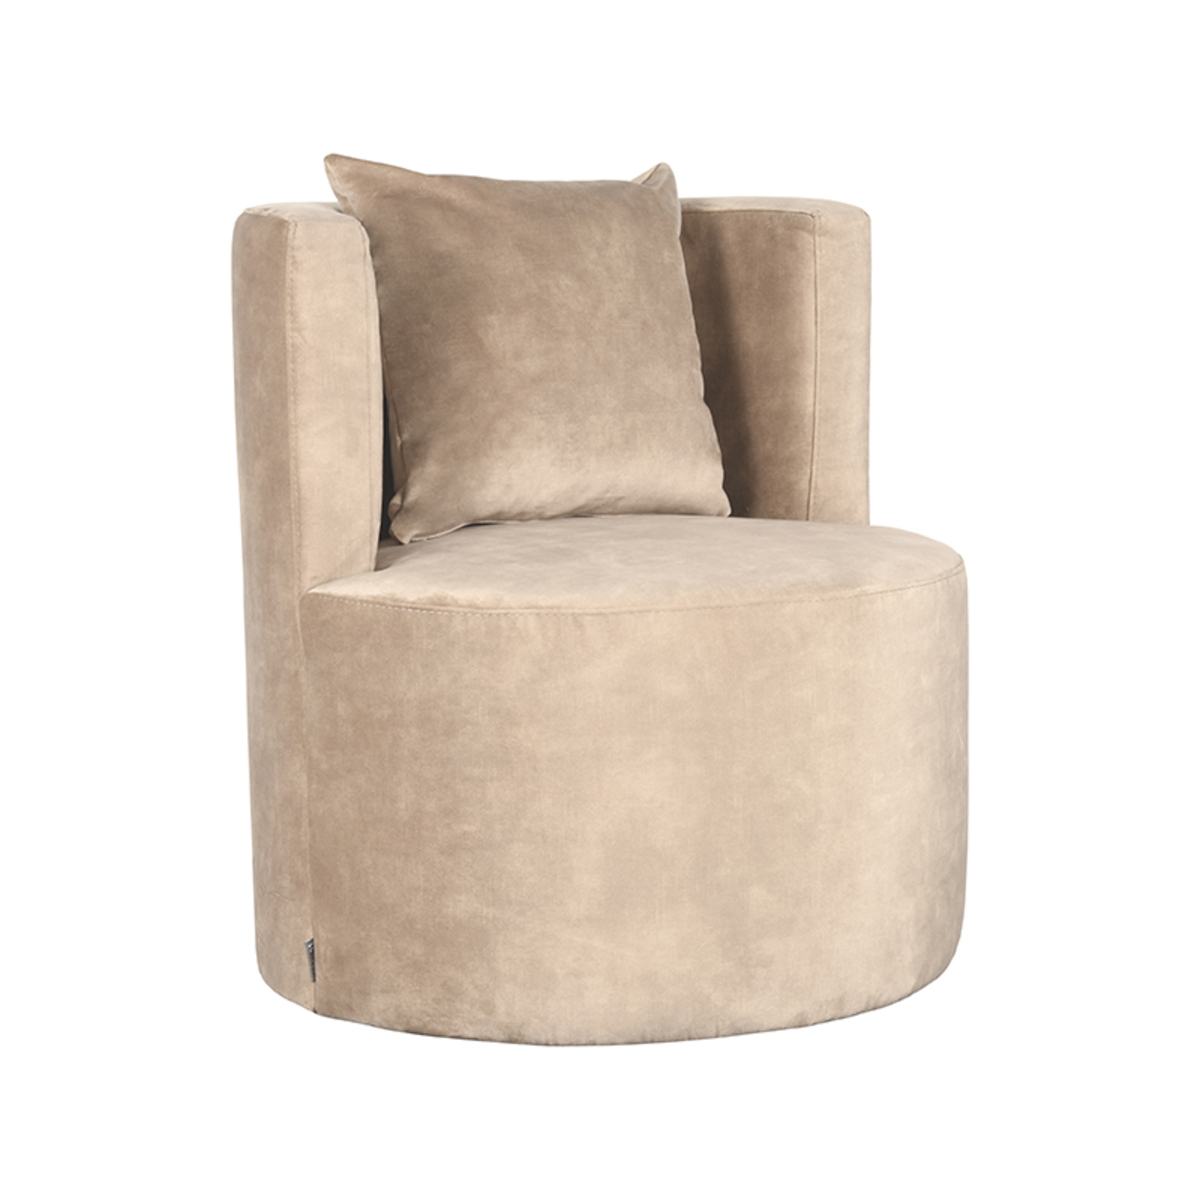  Fauteuil Evy - Zand - Velours afbeelding 1